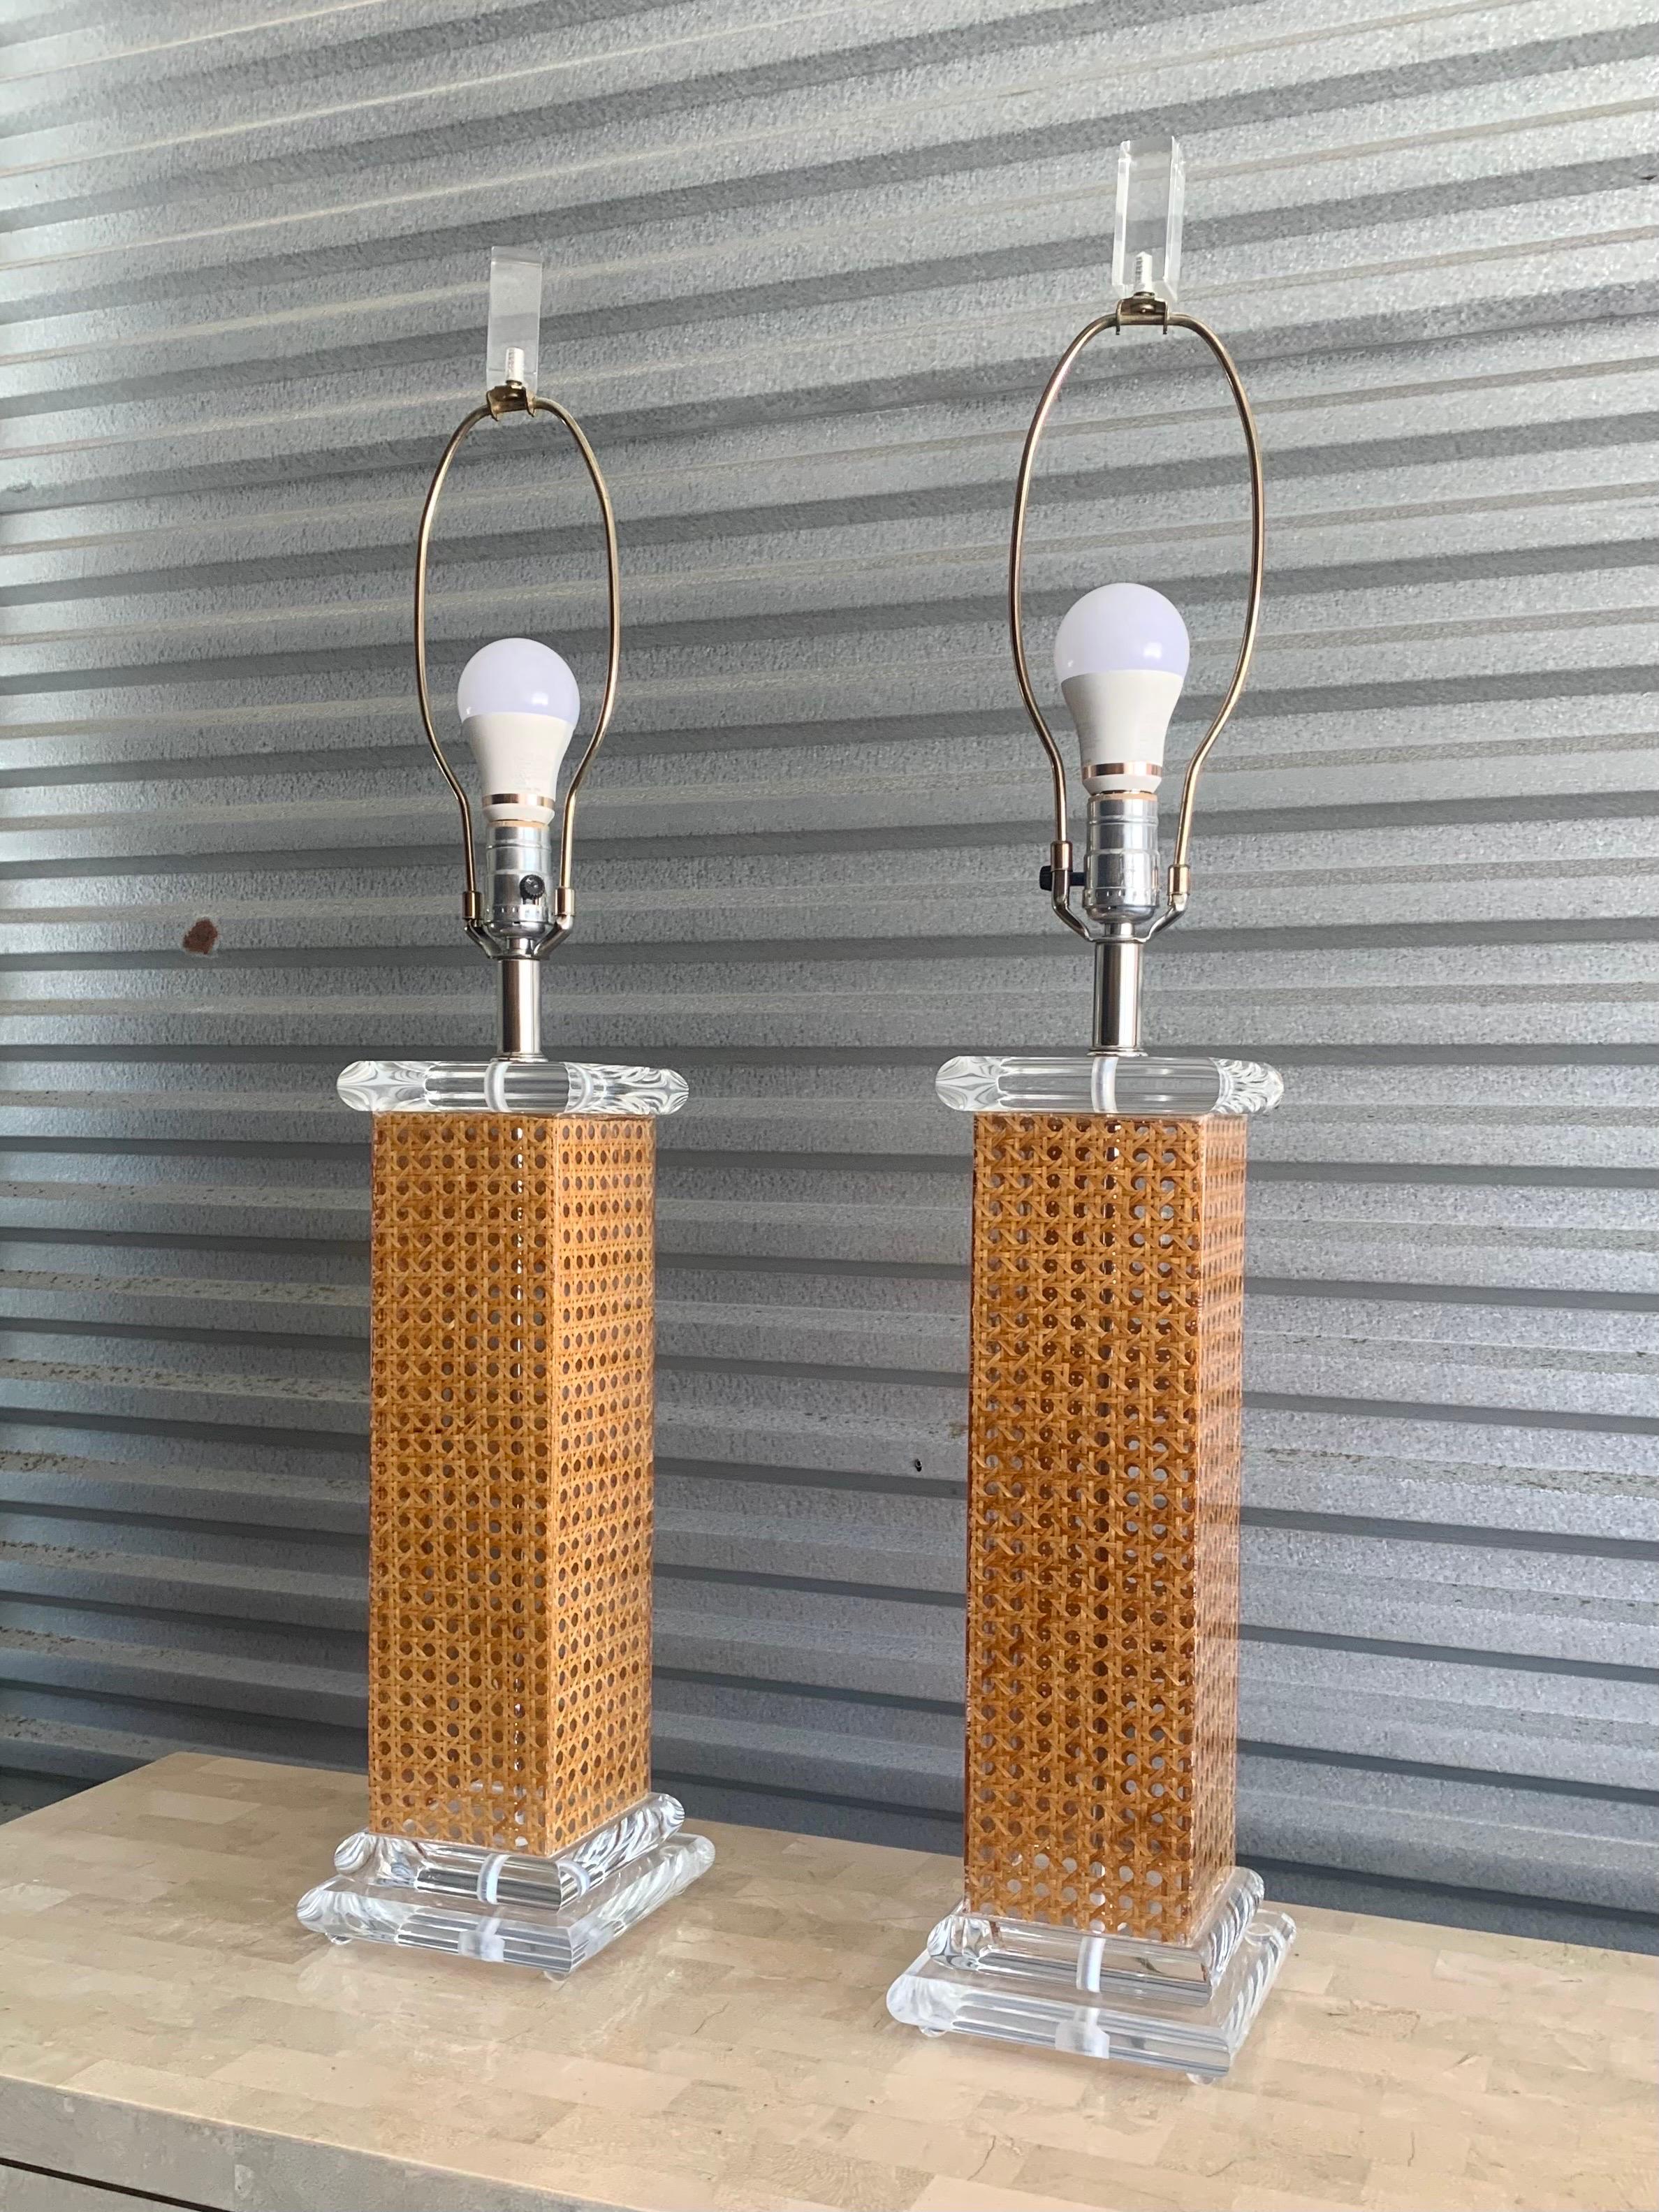 Hollywood Regency Lucite and Cane Table Lamps, Circa 1970s For Sale 6